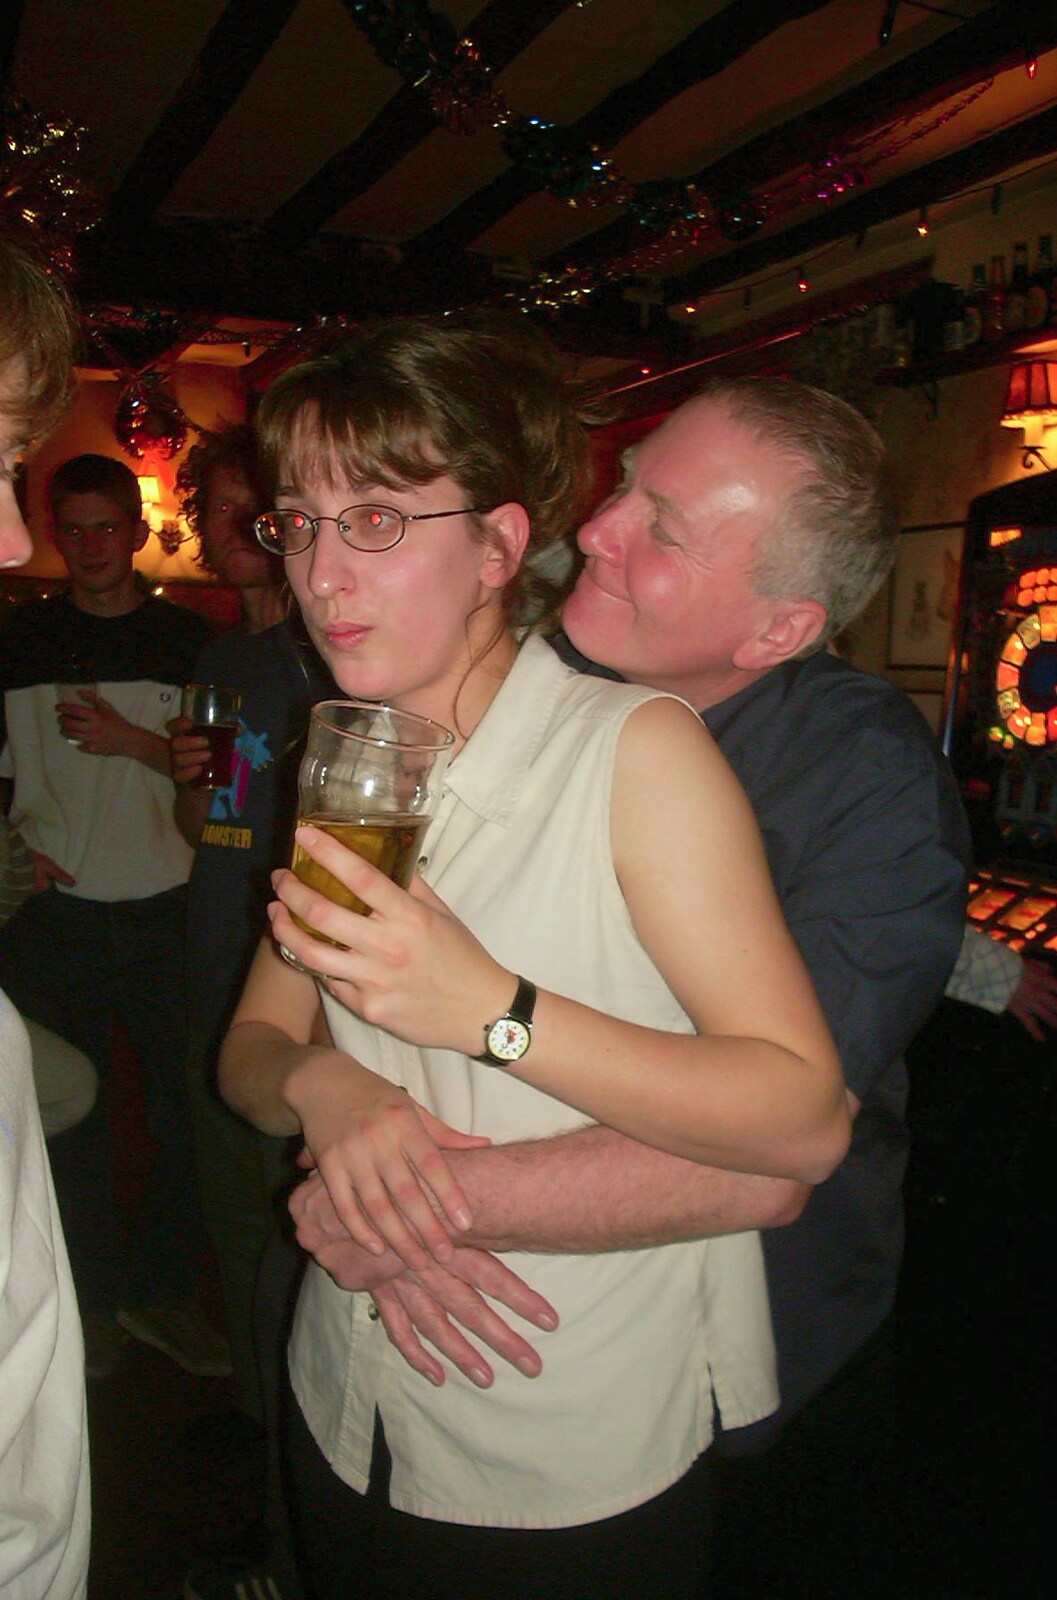 New Year's Eve at the Swan Inn, Brome, Suffolk - 31st December 2002: John Willy grabs Suey from behind